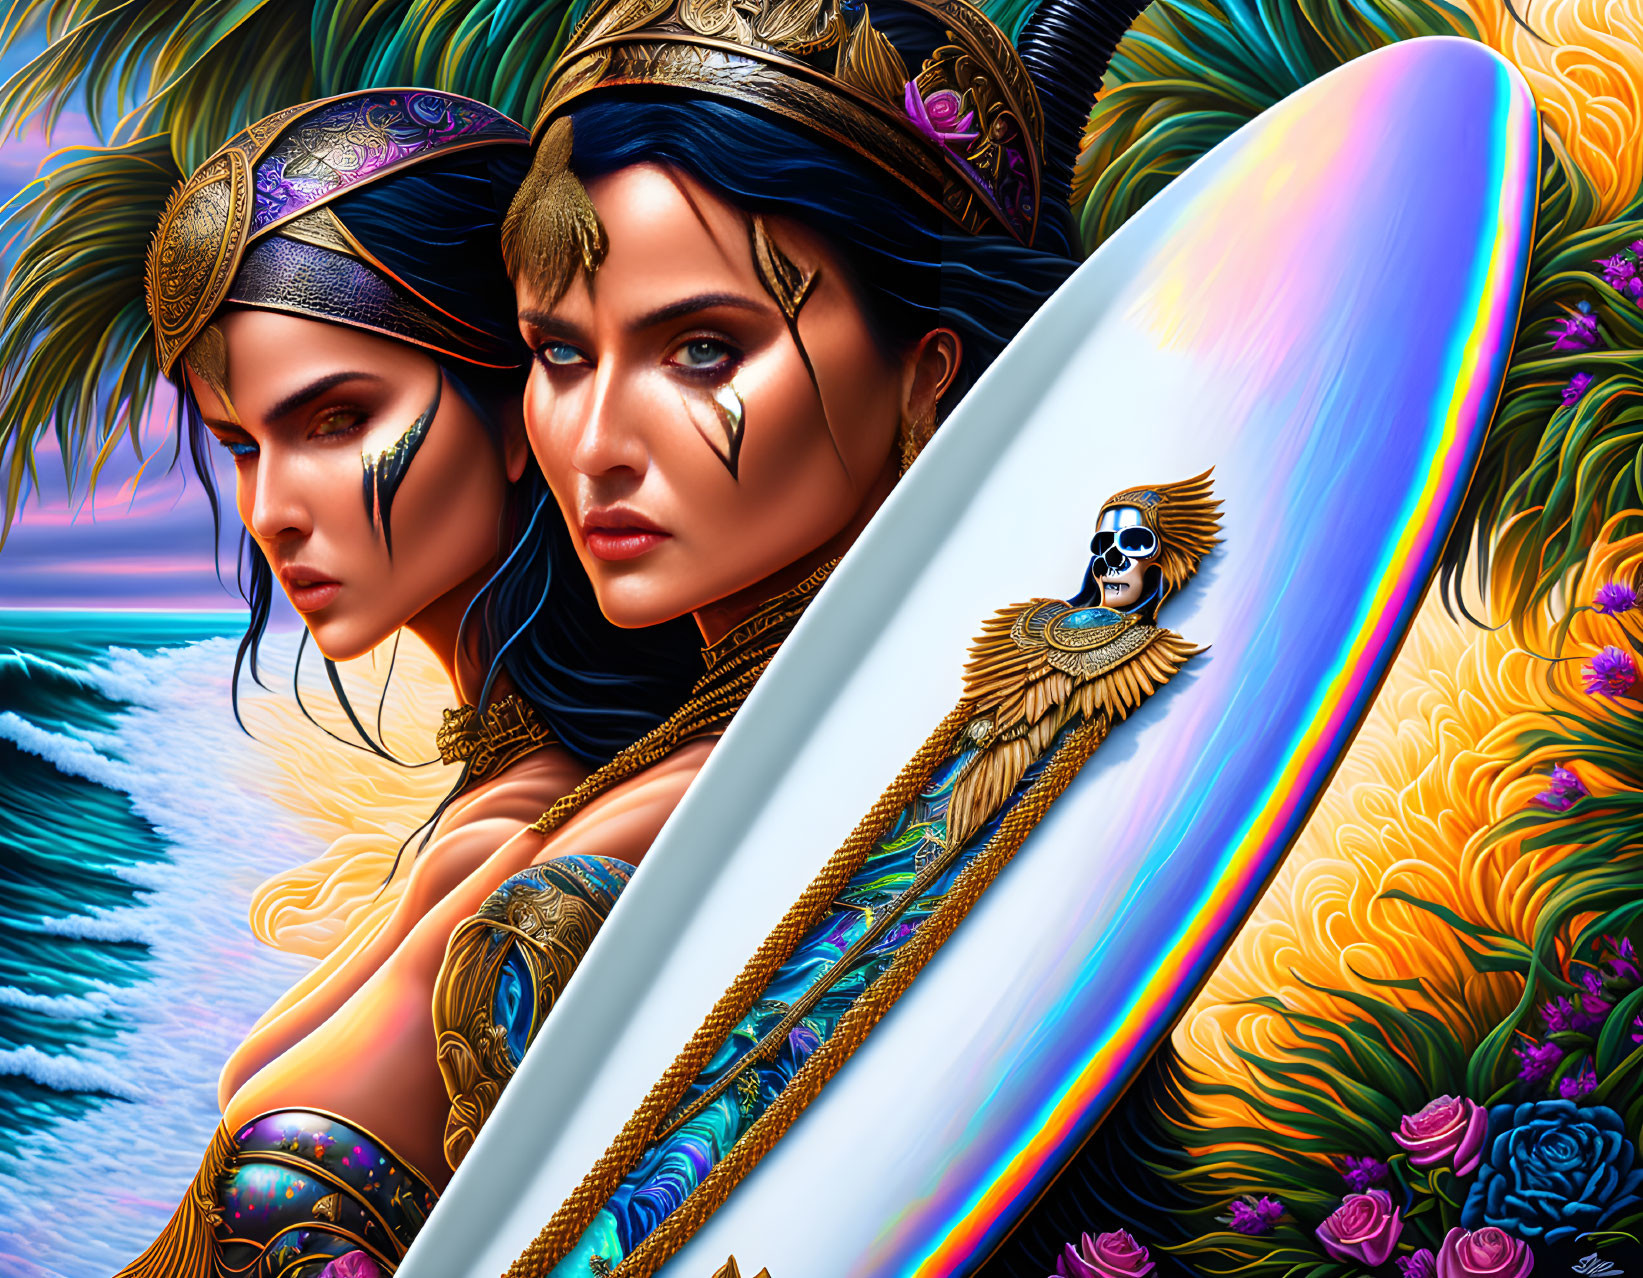 Stylized women in golden armor with elaborate headgear against vibrant tropical backdrop